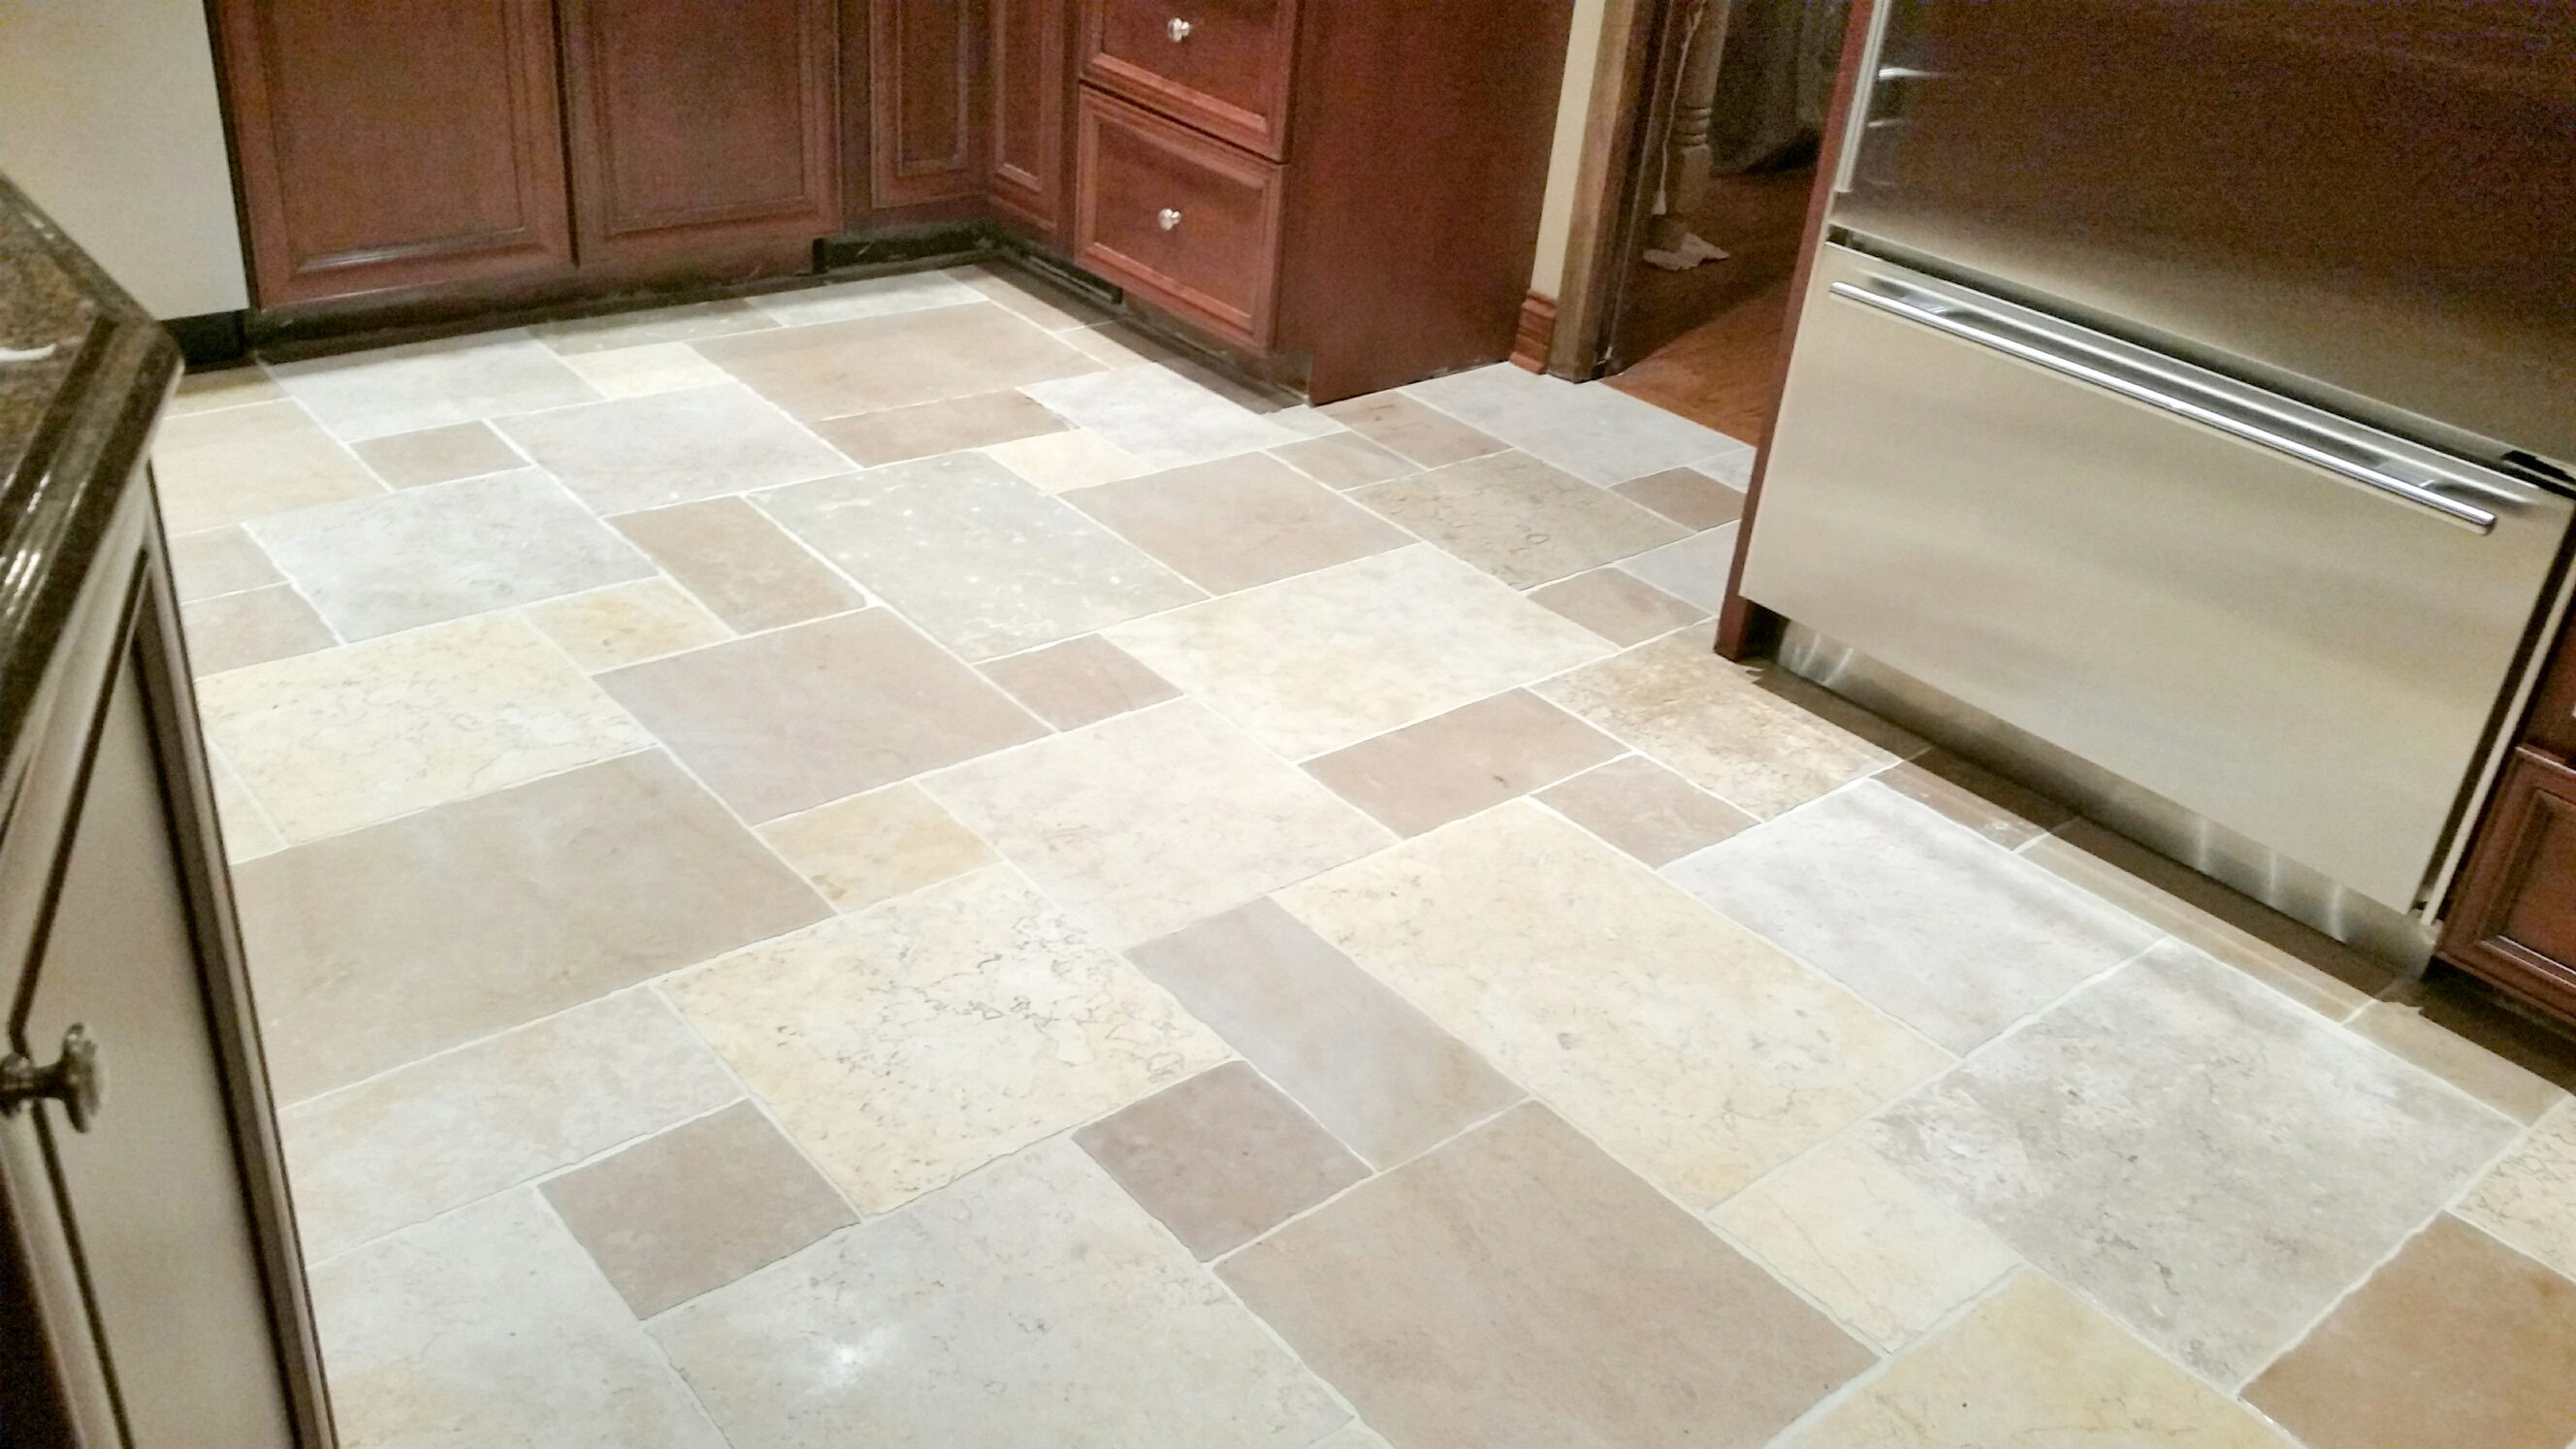 Why Choose Ceramic Tile for Your Floor Mr. Floor Companies Chicago IL